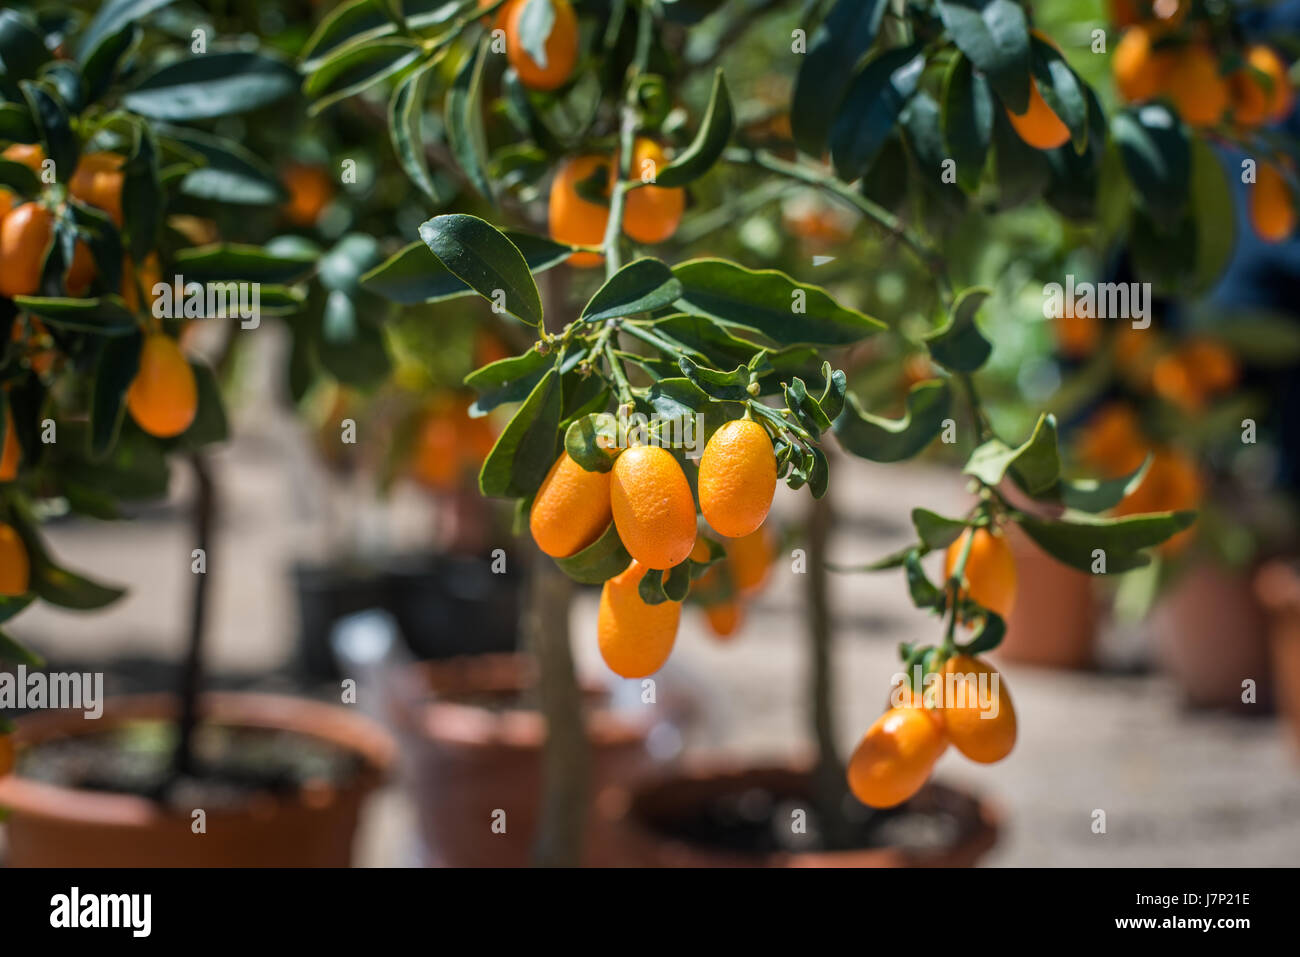 Kumquat fruit close up on green tree branch and leaves, selective focus with vase in plant nursery in background Stock Photo